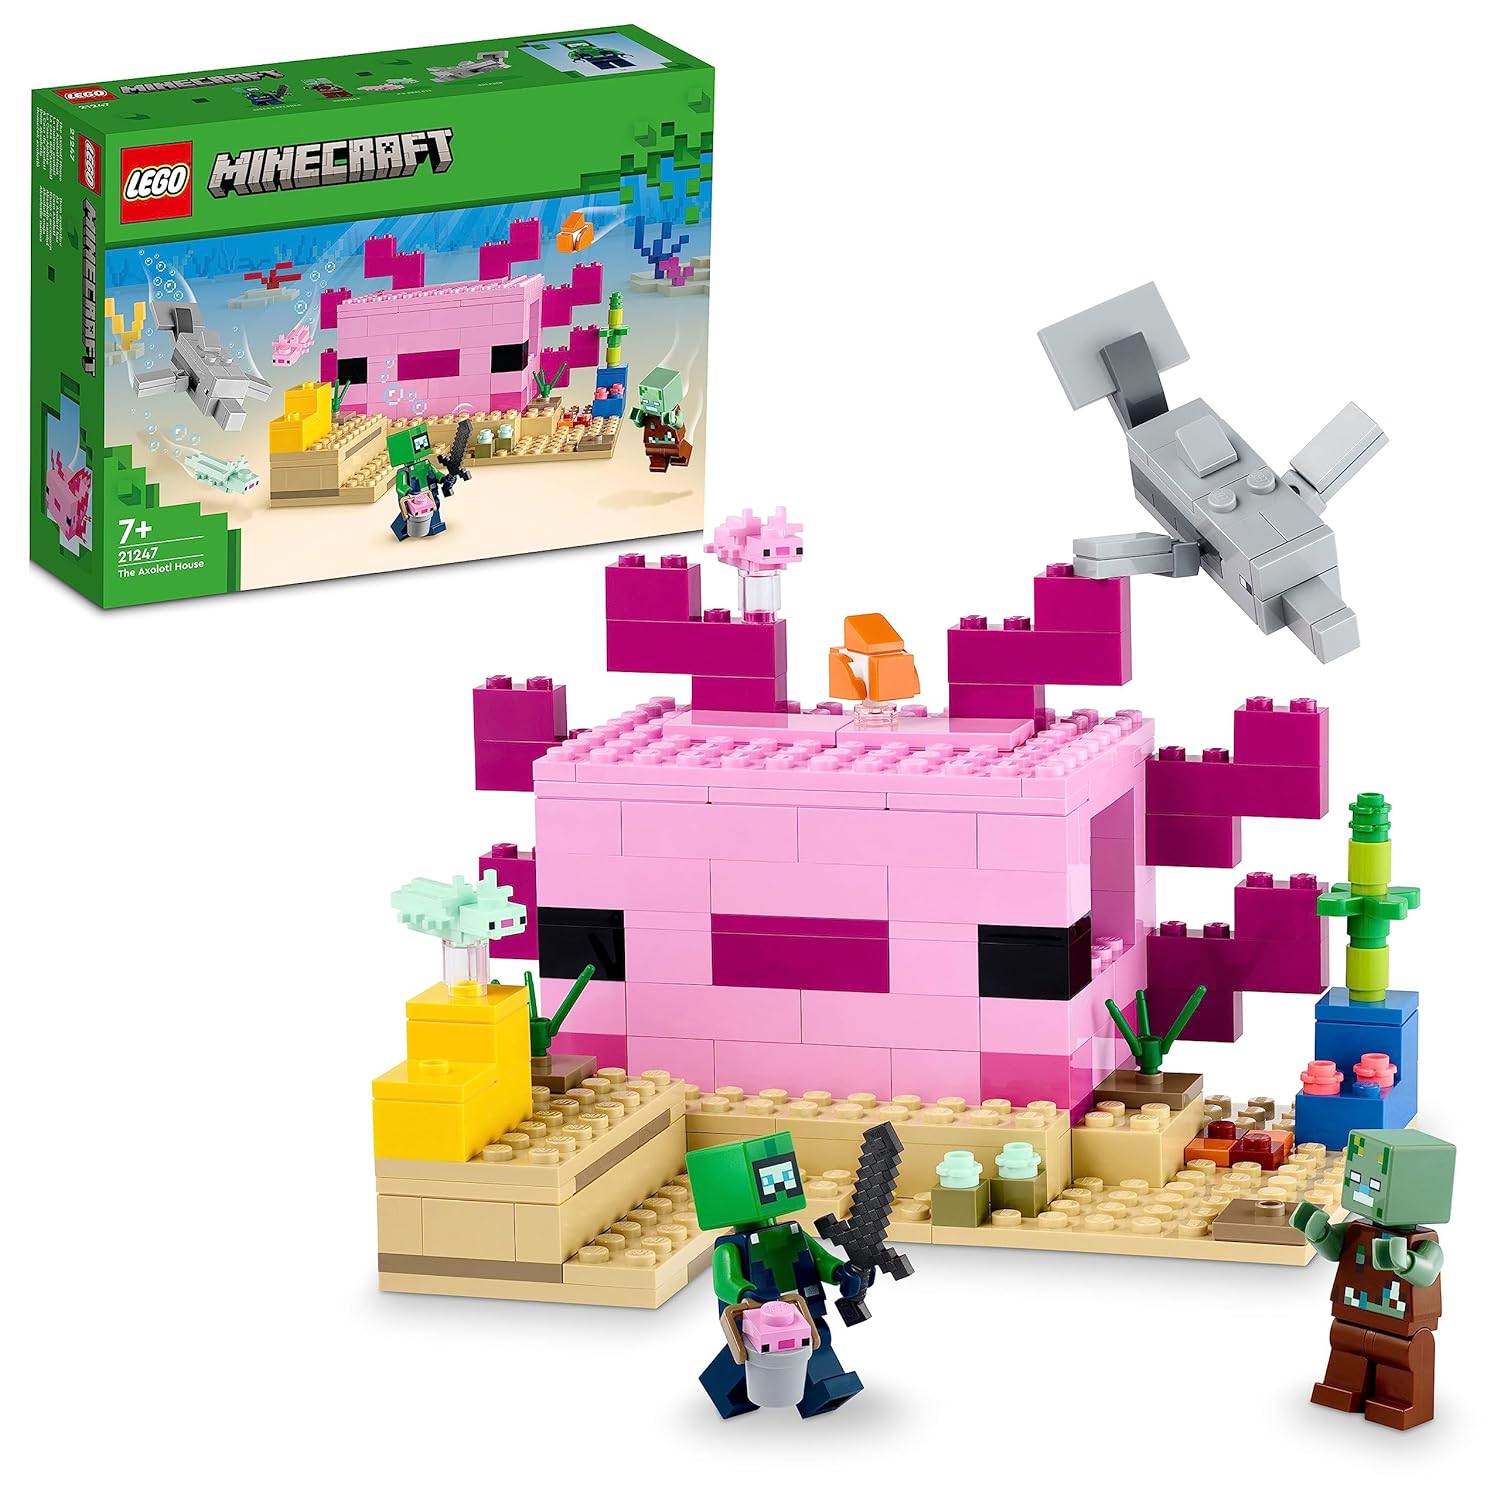 LEGO Minecraft The Axolotl House Building Kit for Ages 7+